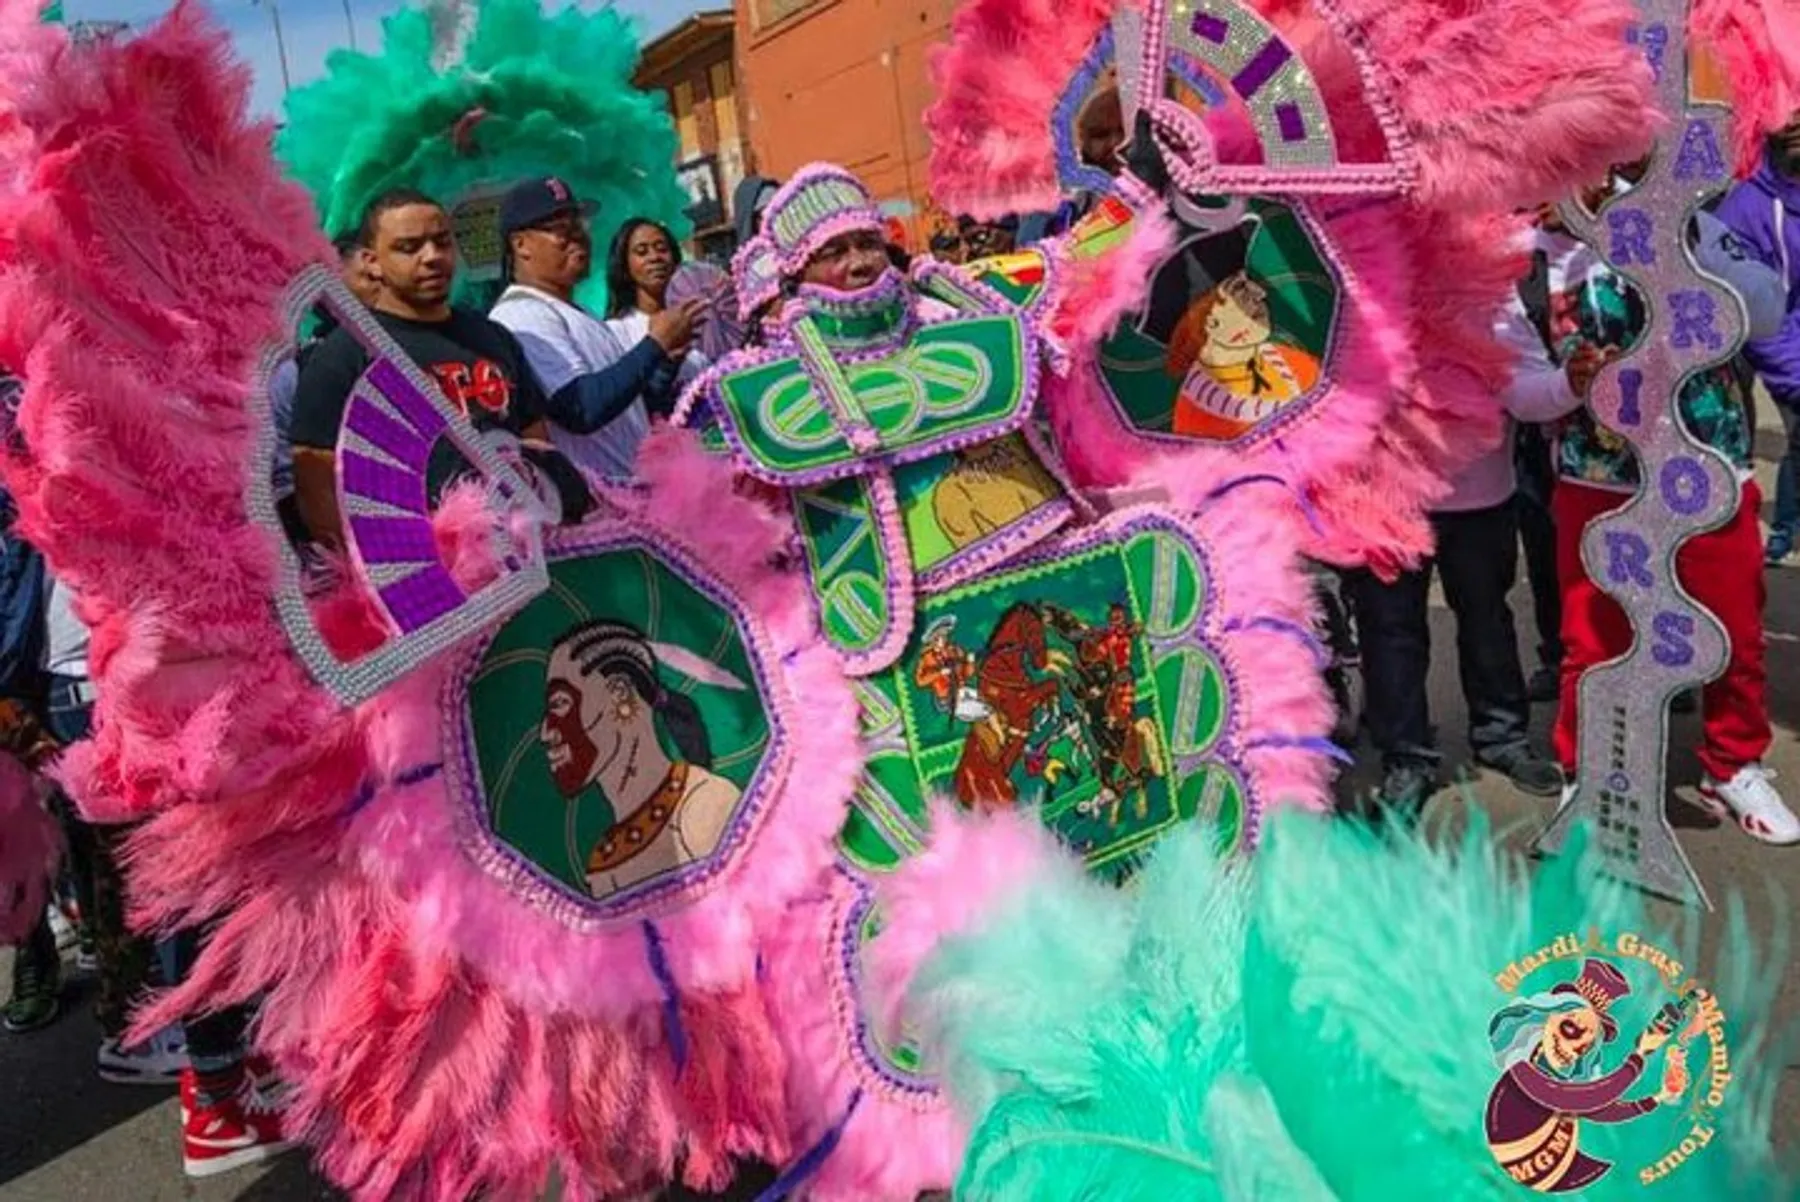 This image captures a vibrant street scene with individuals dressed in elaborate pink and green feathered costumes, likely part of a parade or cultural festival.